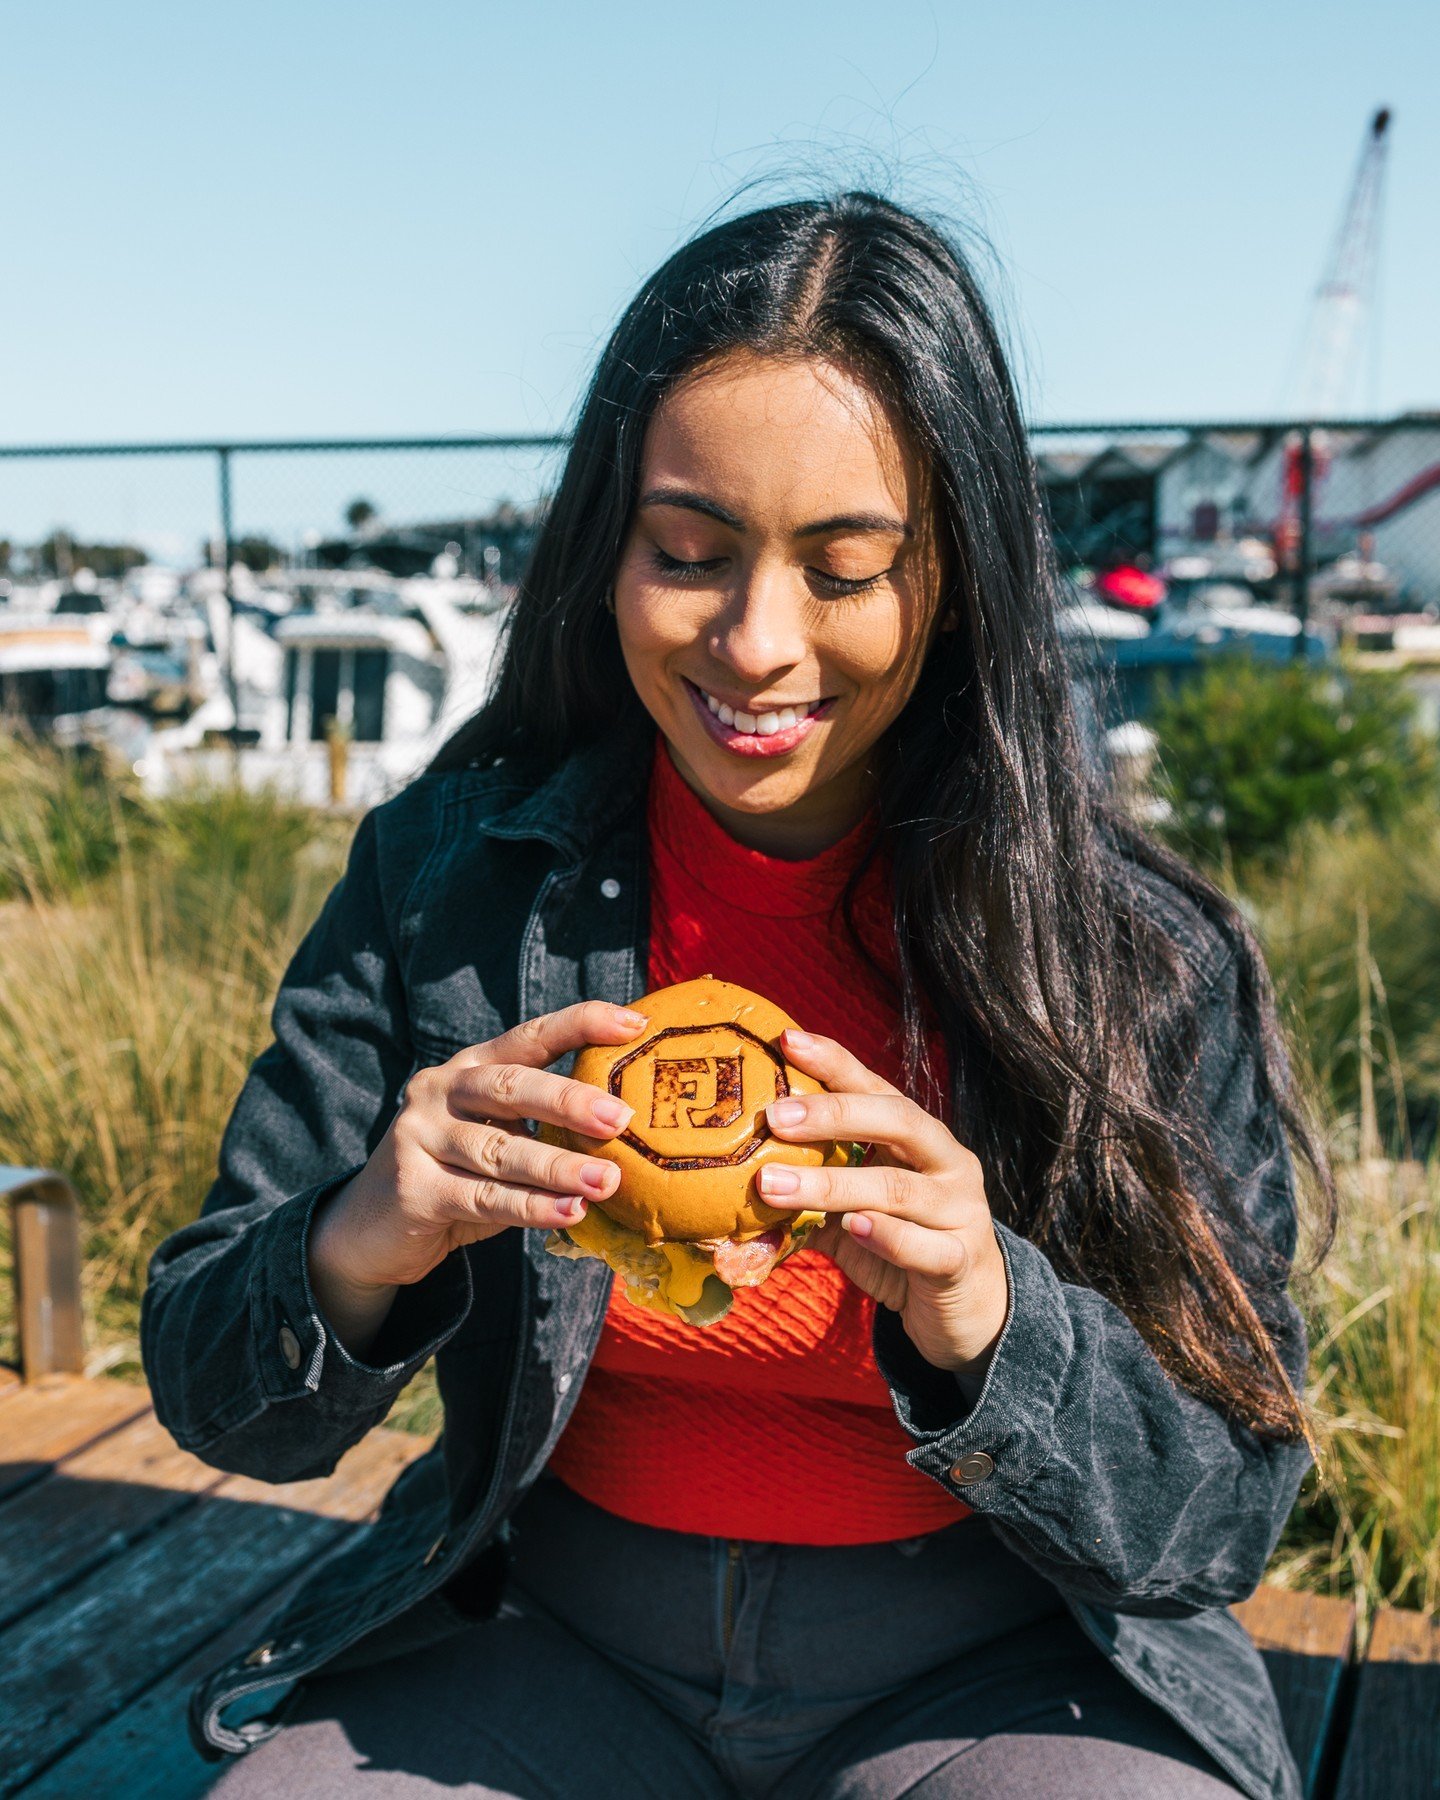 Winter isn't here yet, so grab your jacket and your burger to enjoy the last of the sunshine 😎